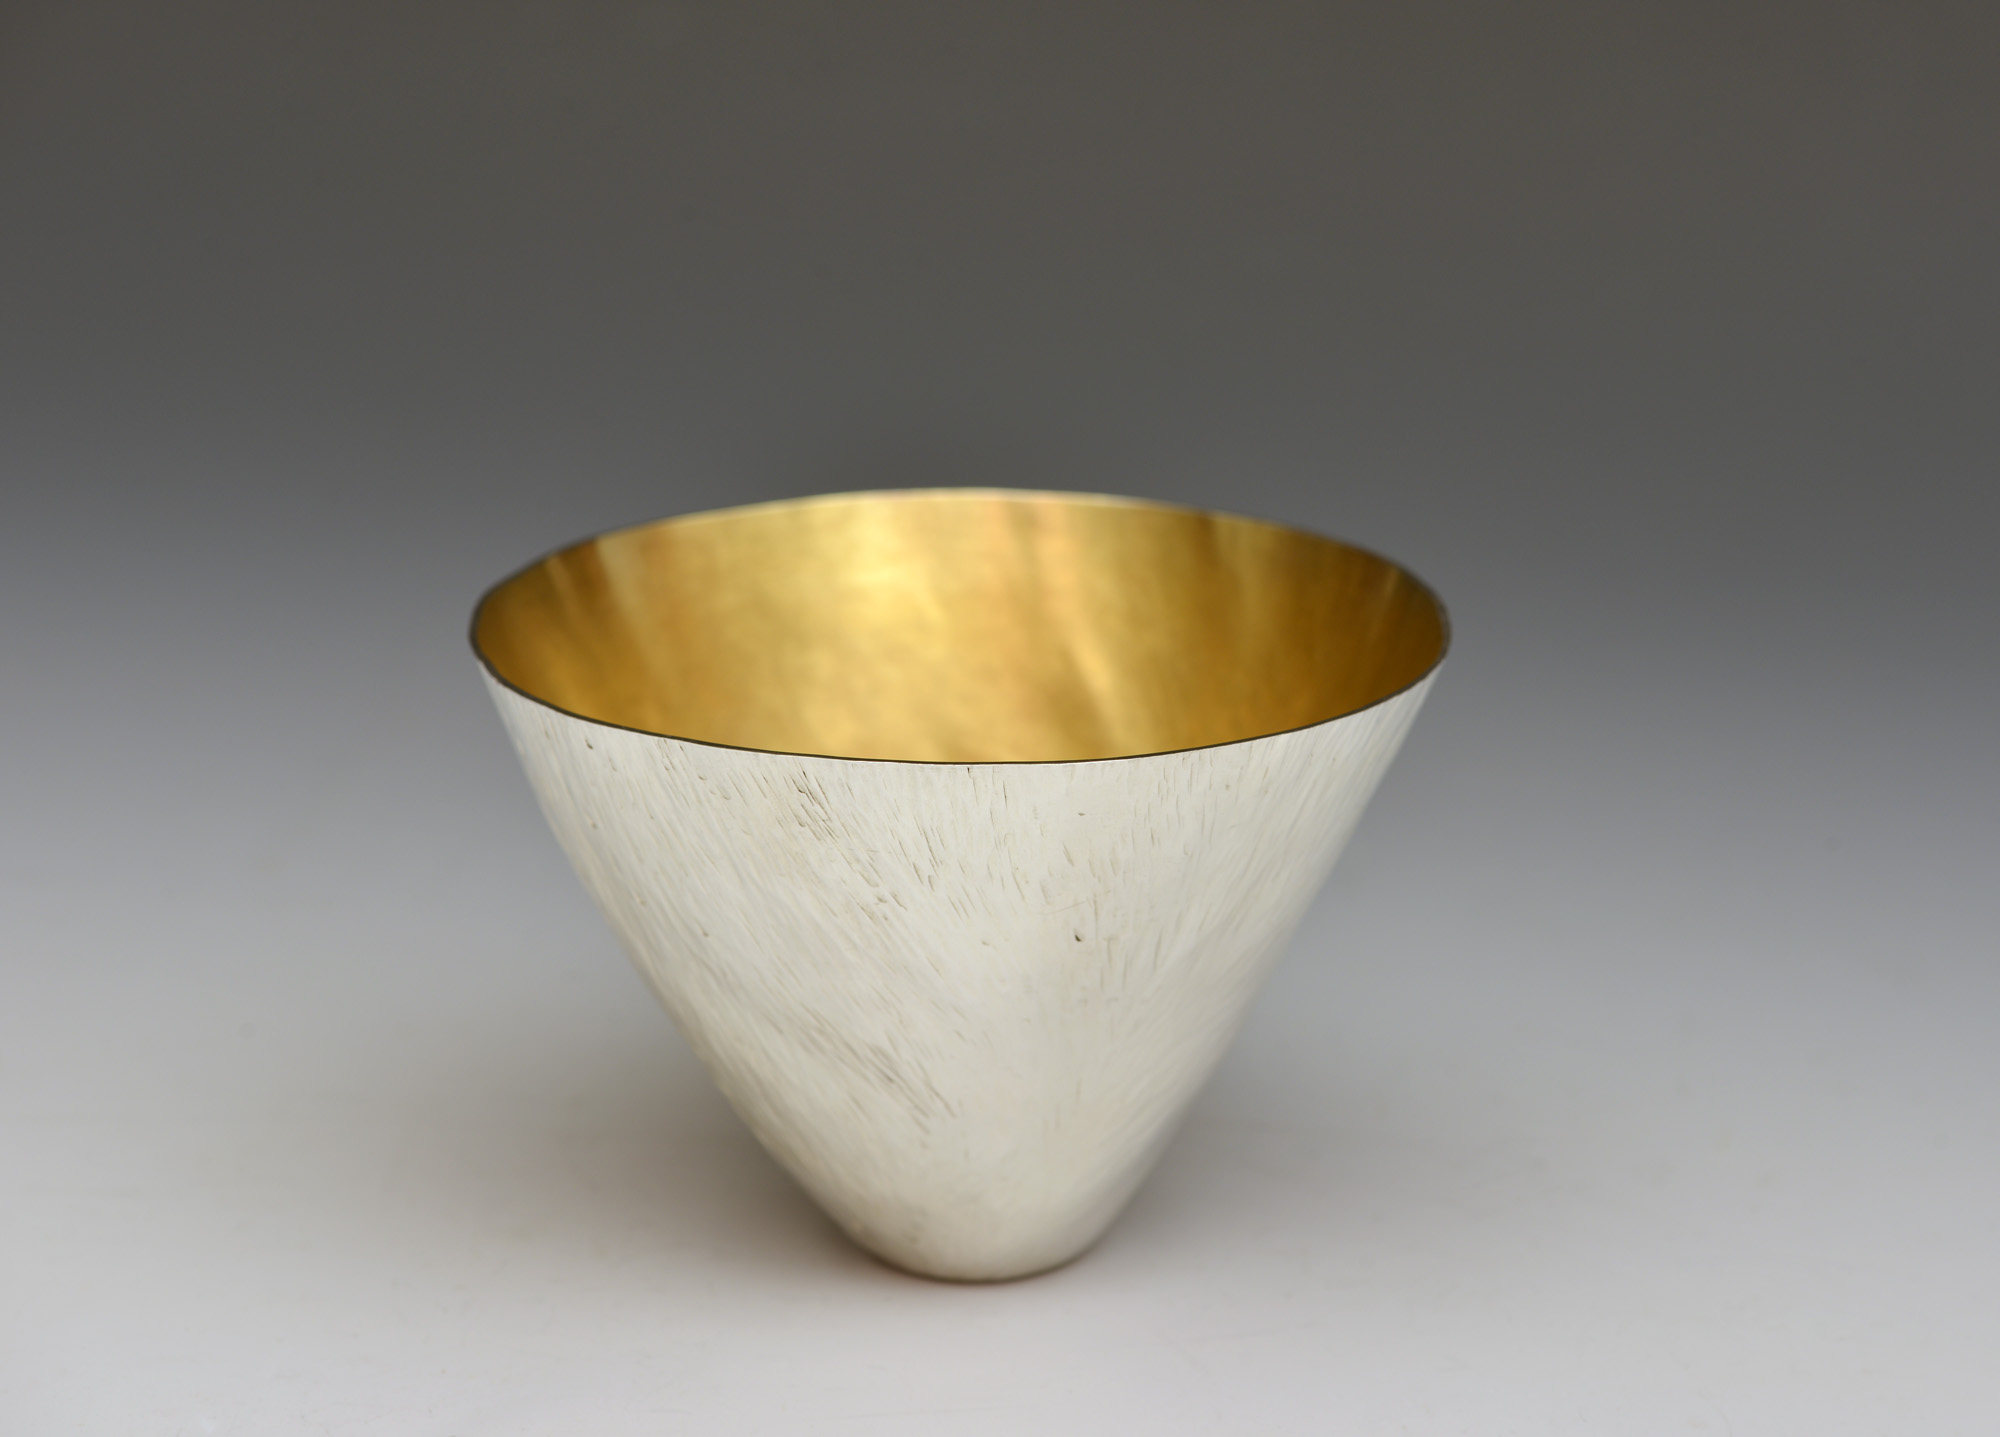 A water beaker by Rebecca-Anne Boldra: made of Britannia Silver, plannished with an internal gold hard plate and commissioned in 2017